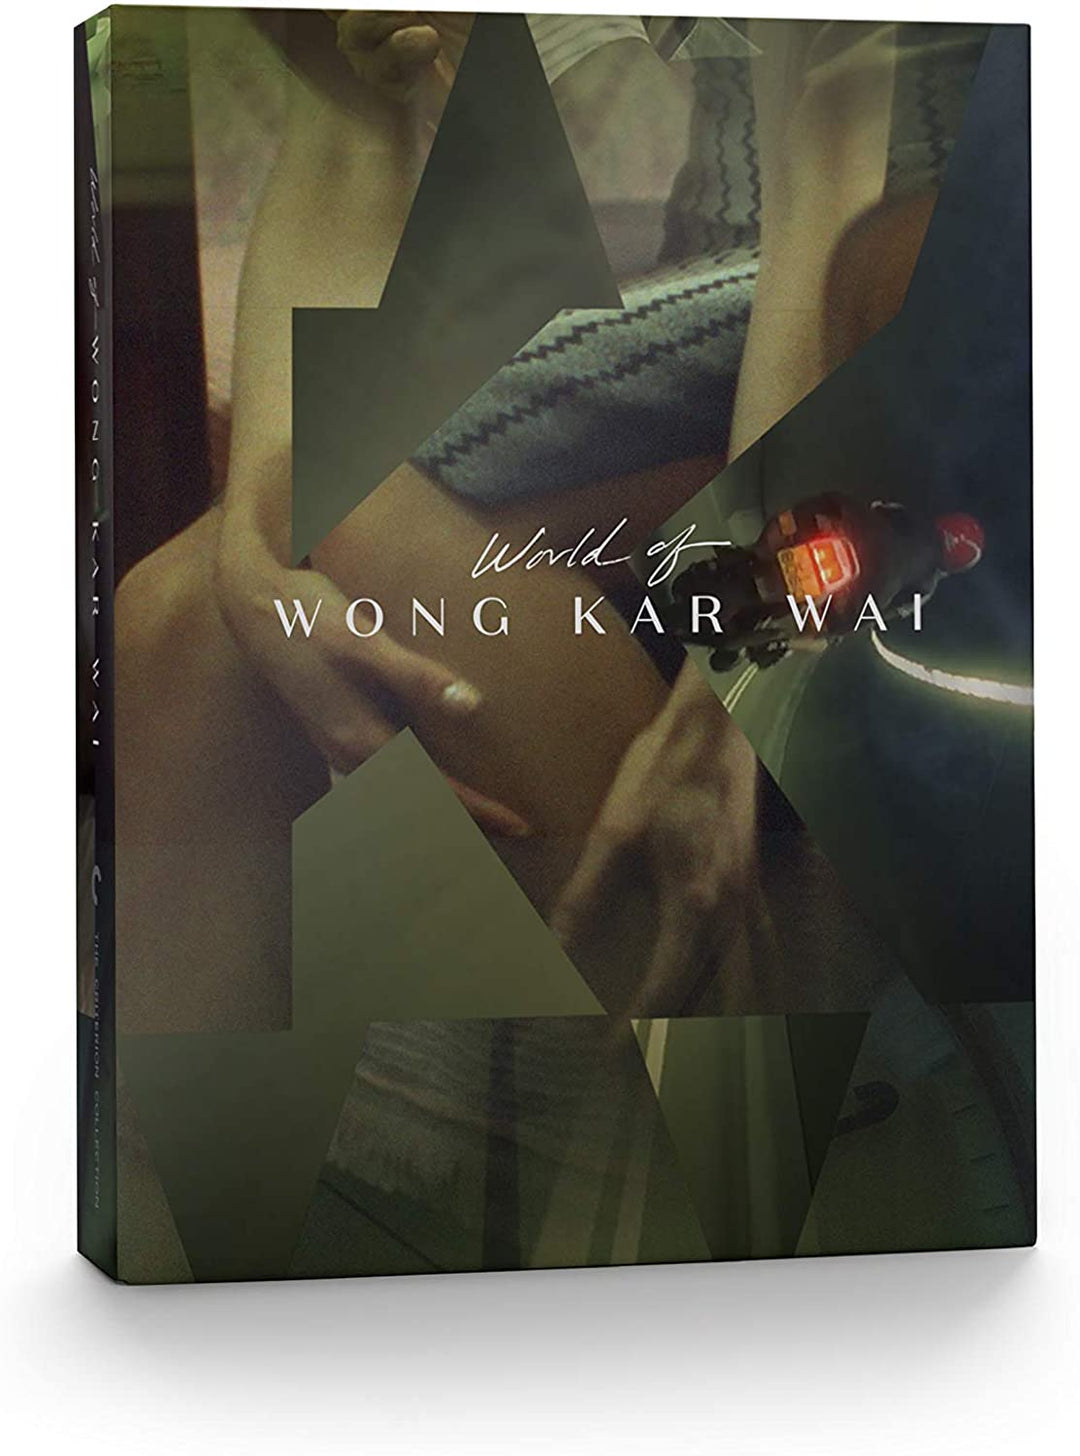 World Of Wong Kar Wai (Criterion Collection) UK Only (7 Films - As Tears Go By/ Days Of Being Wild/ Chungking Express/ Fallen Angels/ Happy Together/ In The Mood For Love [Blu-ray]